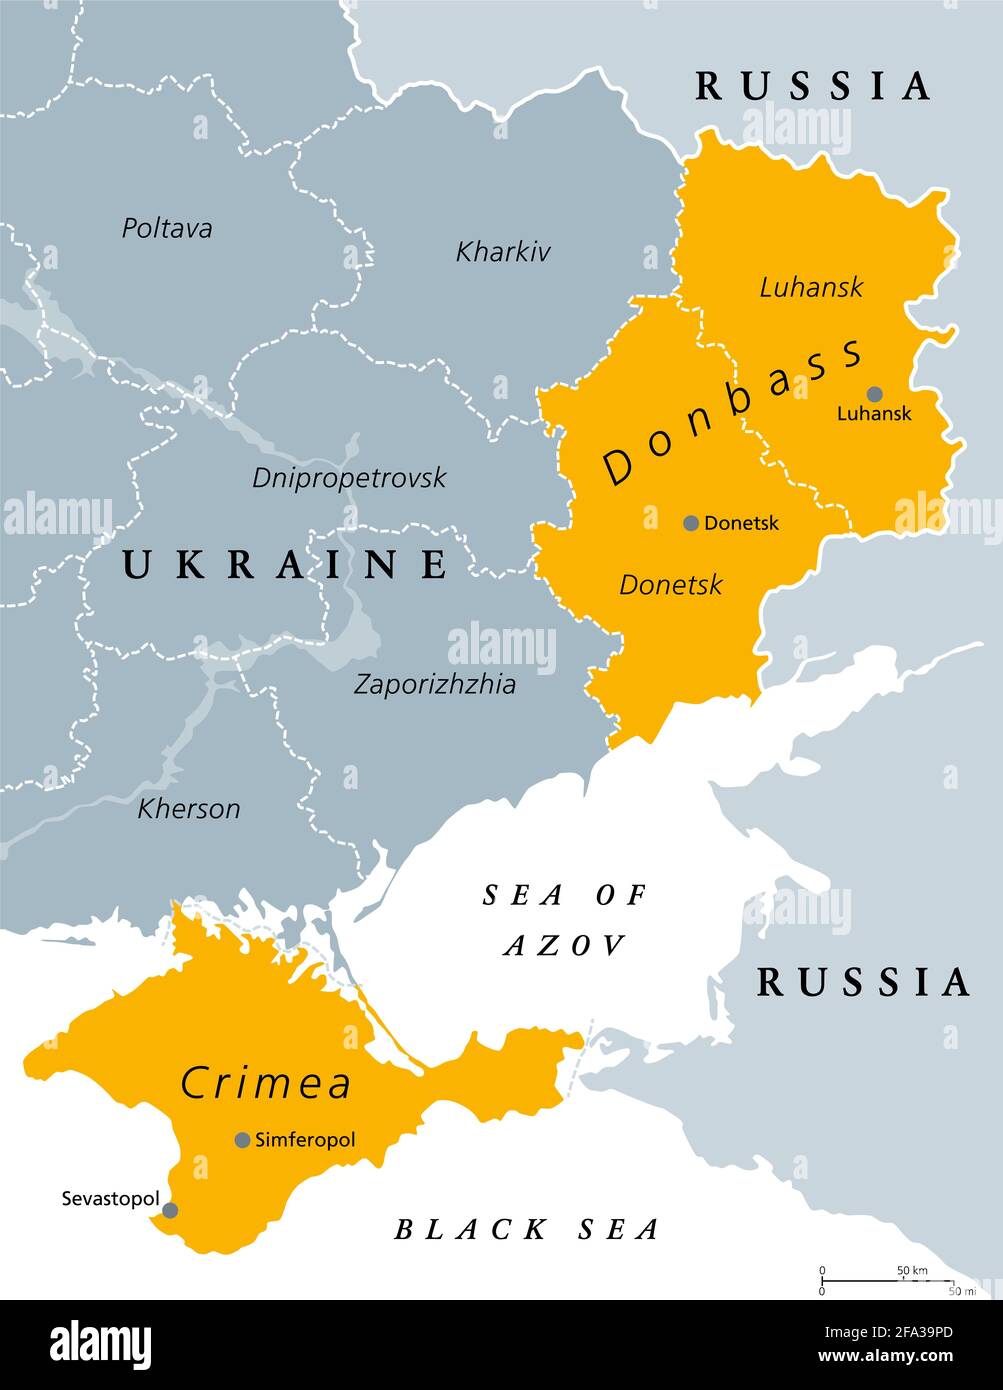 Donbass and Crimea, political map. Crimea peninsula on the coast of Black Sea, and Donbass region, formed by Donetsk and Luhansk region. Disputed area. Stock Photo